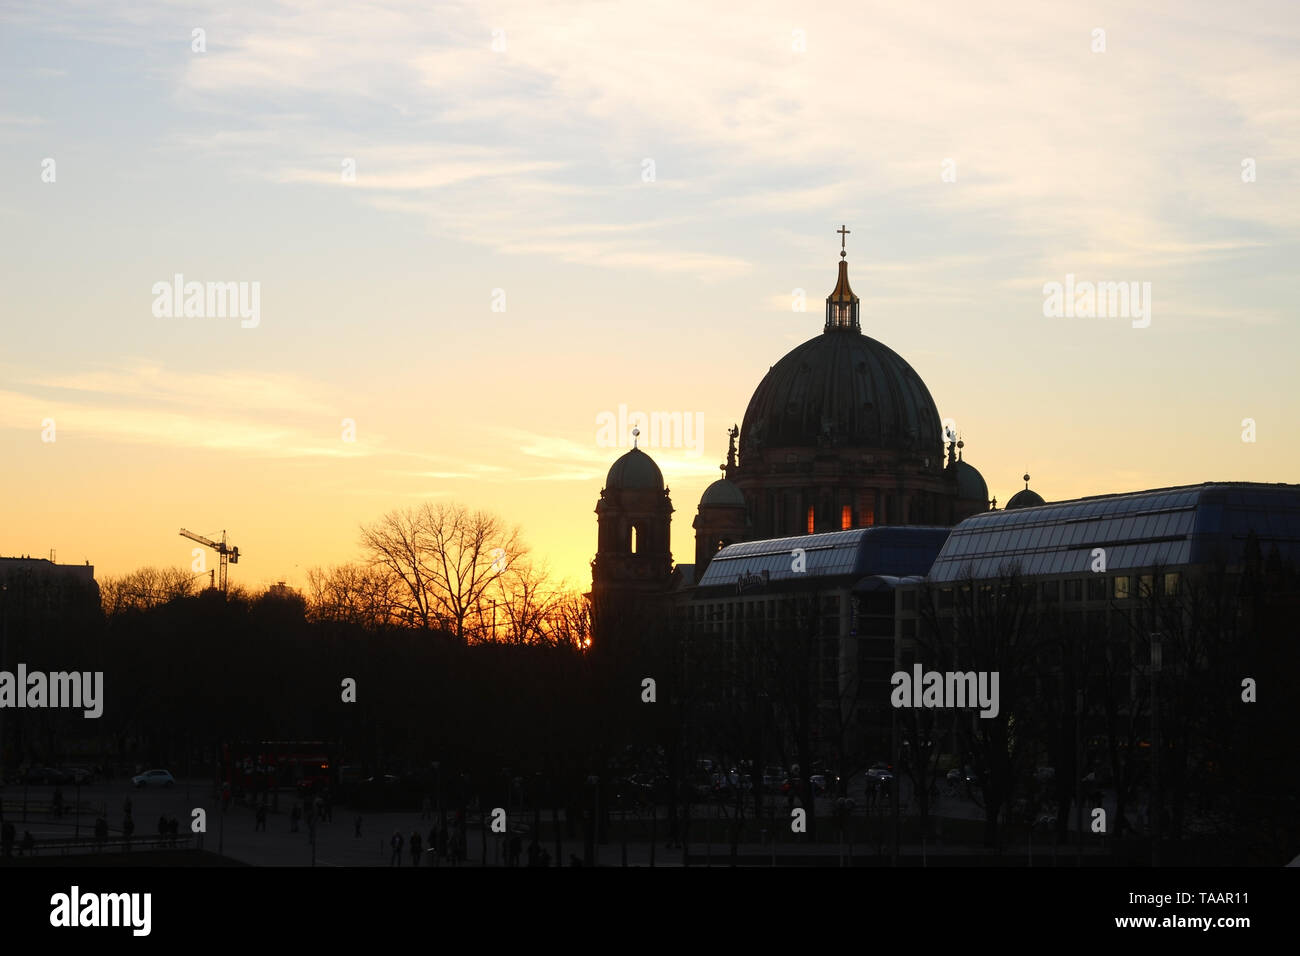 Sunset and  St. Nikolaikirche is the oldest church in Berlin, capital of Germany. The church is located in the eastern part of central Berlin. Stock Photo